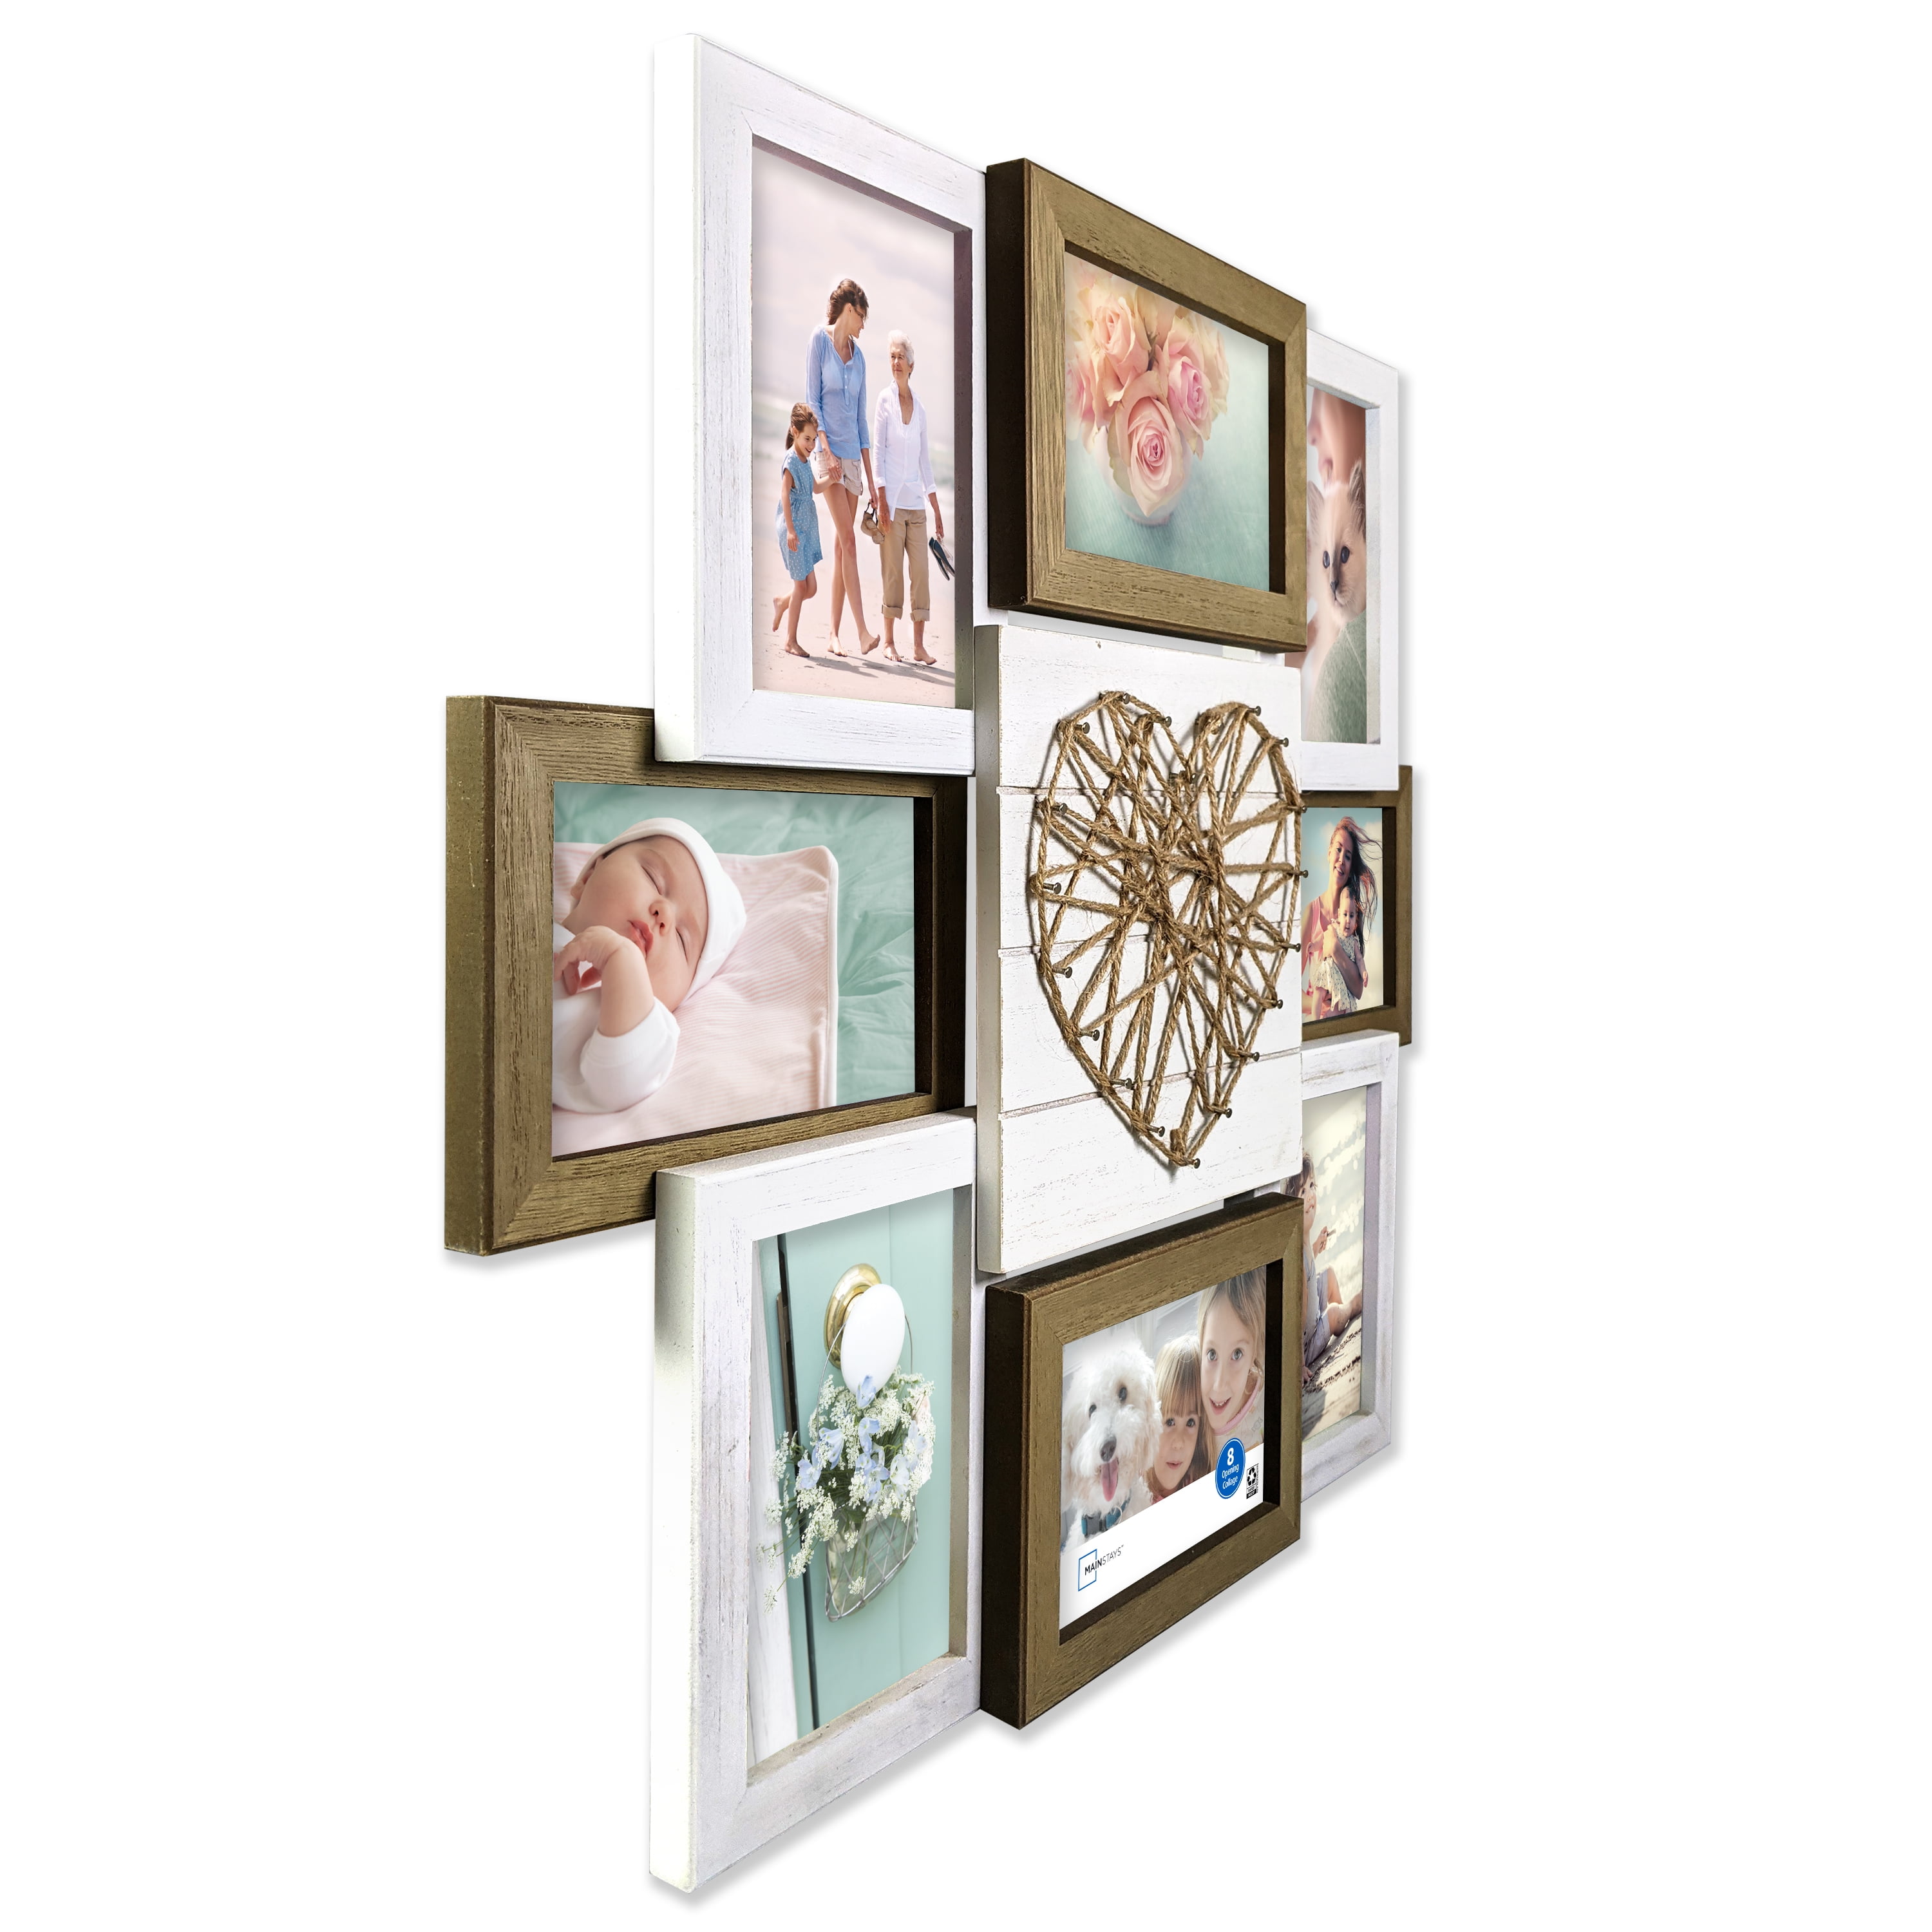 LIVE LAUGH LOVE 8 Aperture photo frame Wall Set Mounted Home Decors 